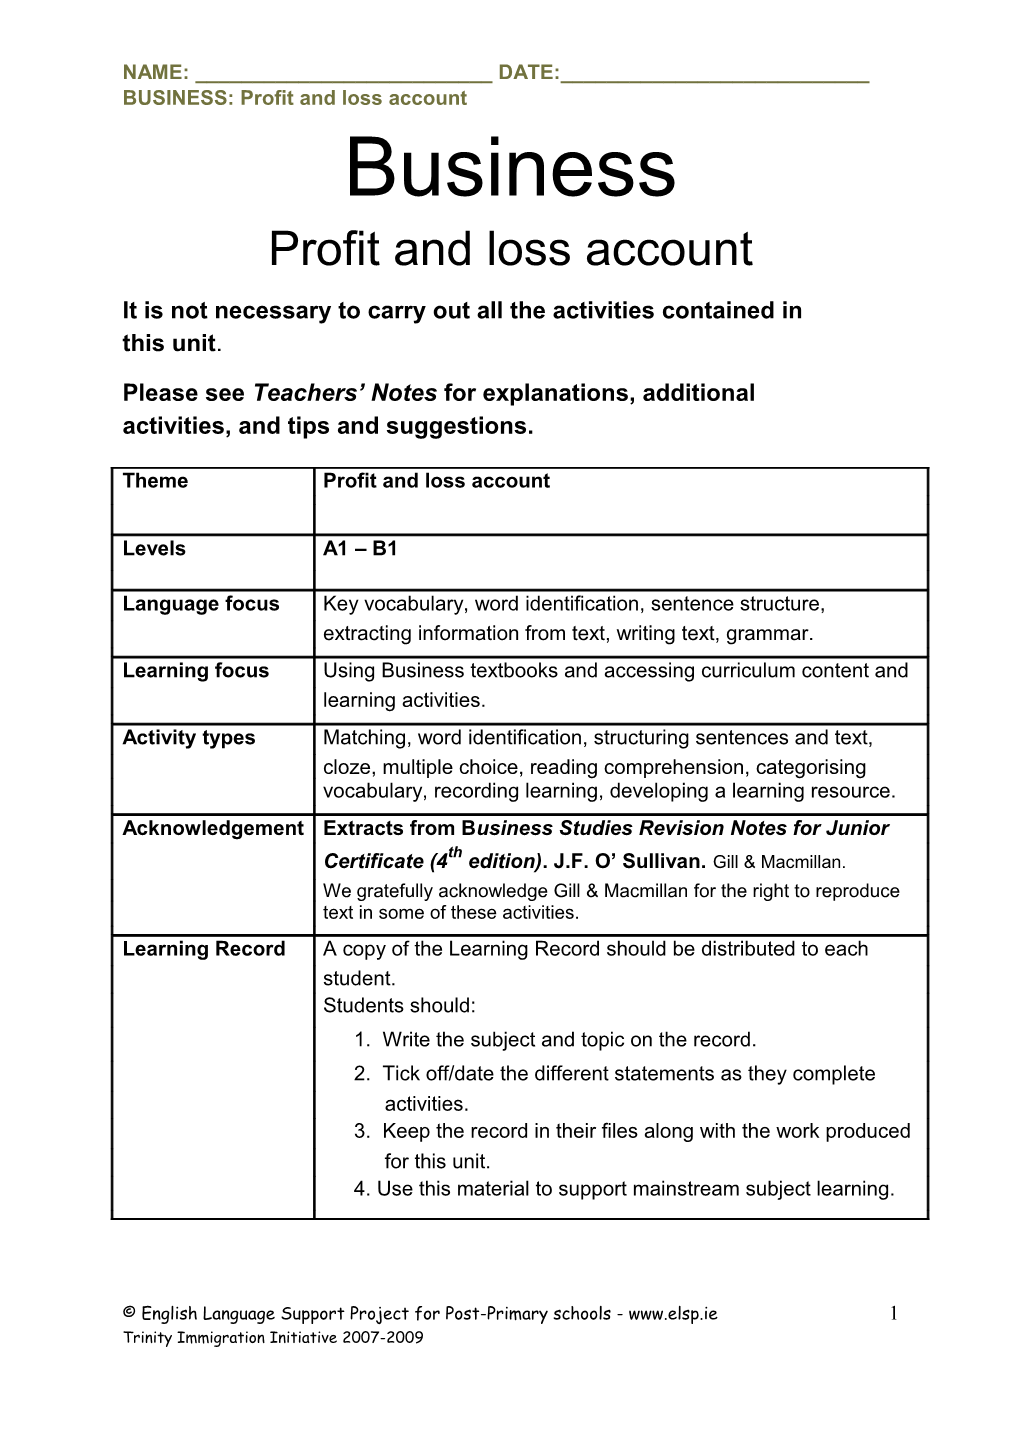 BUSINESS: Profit and Loss Account